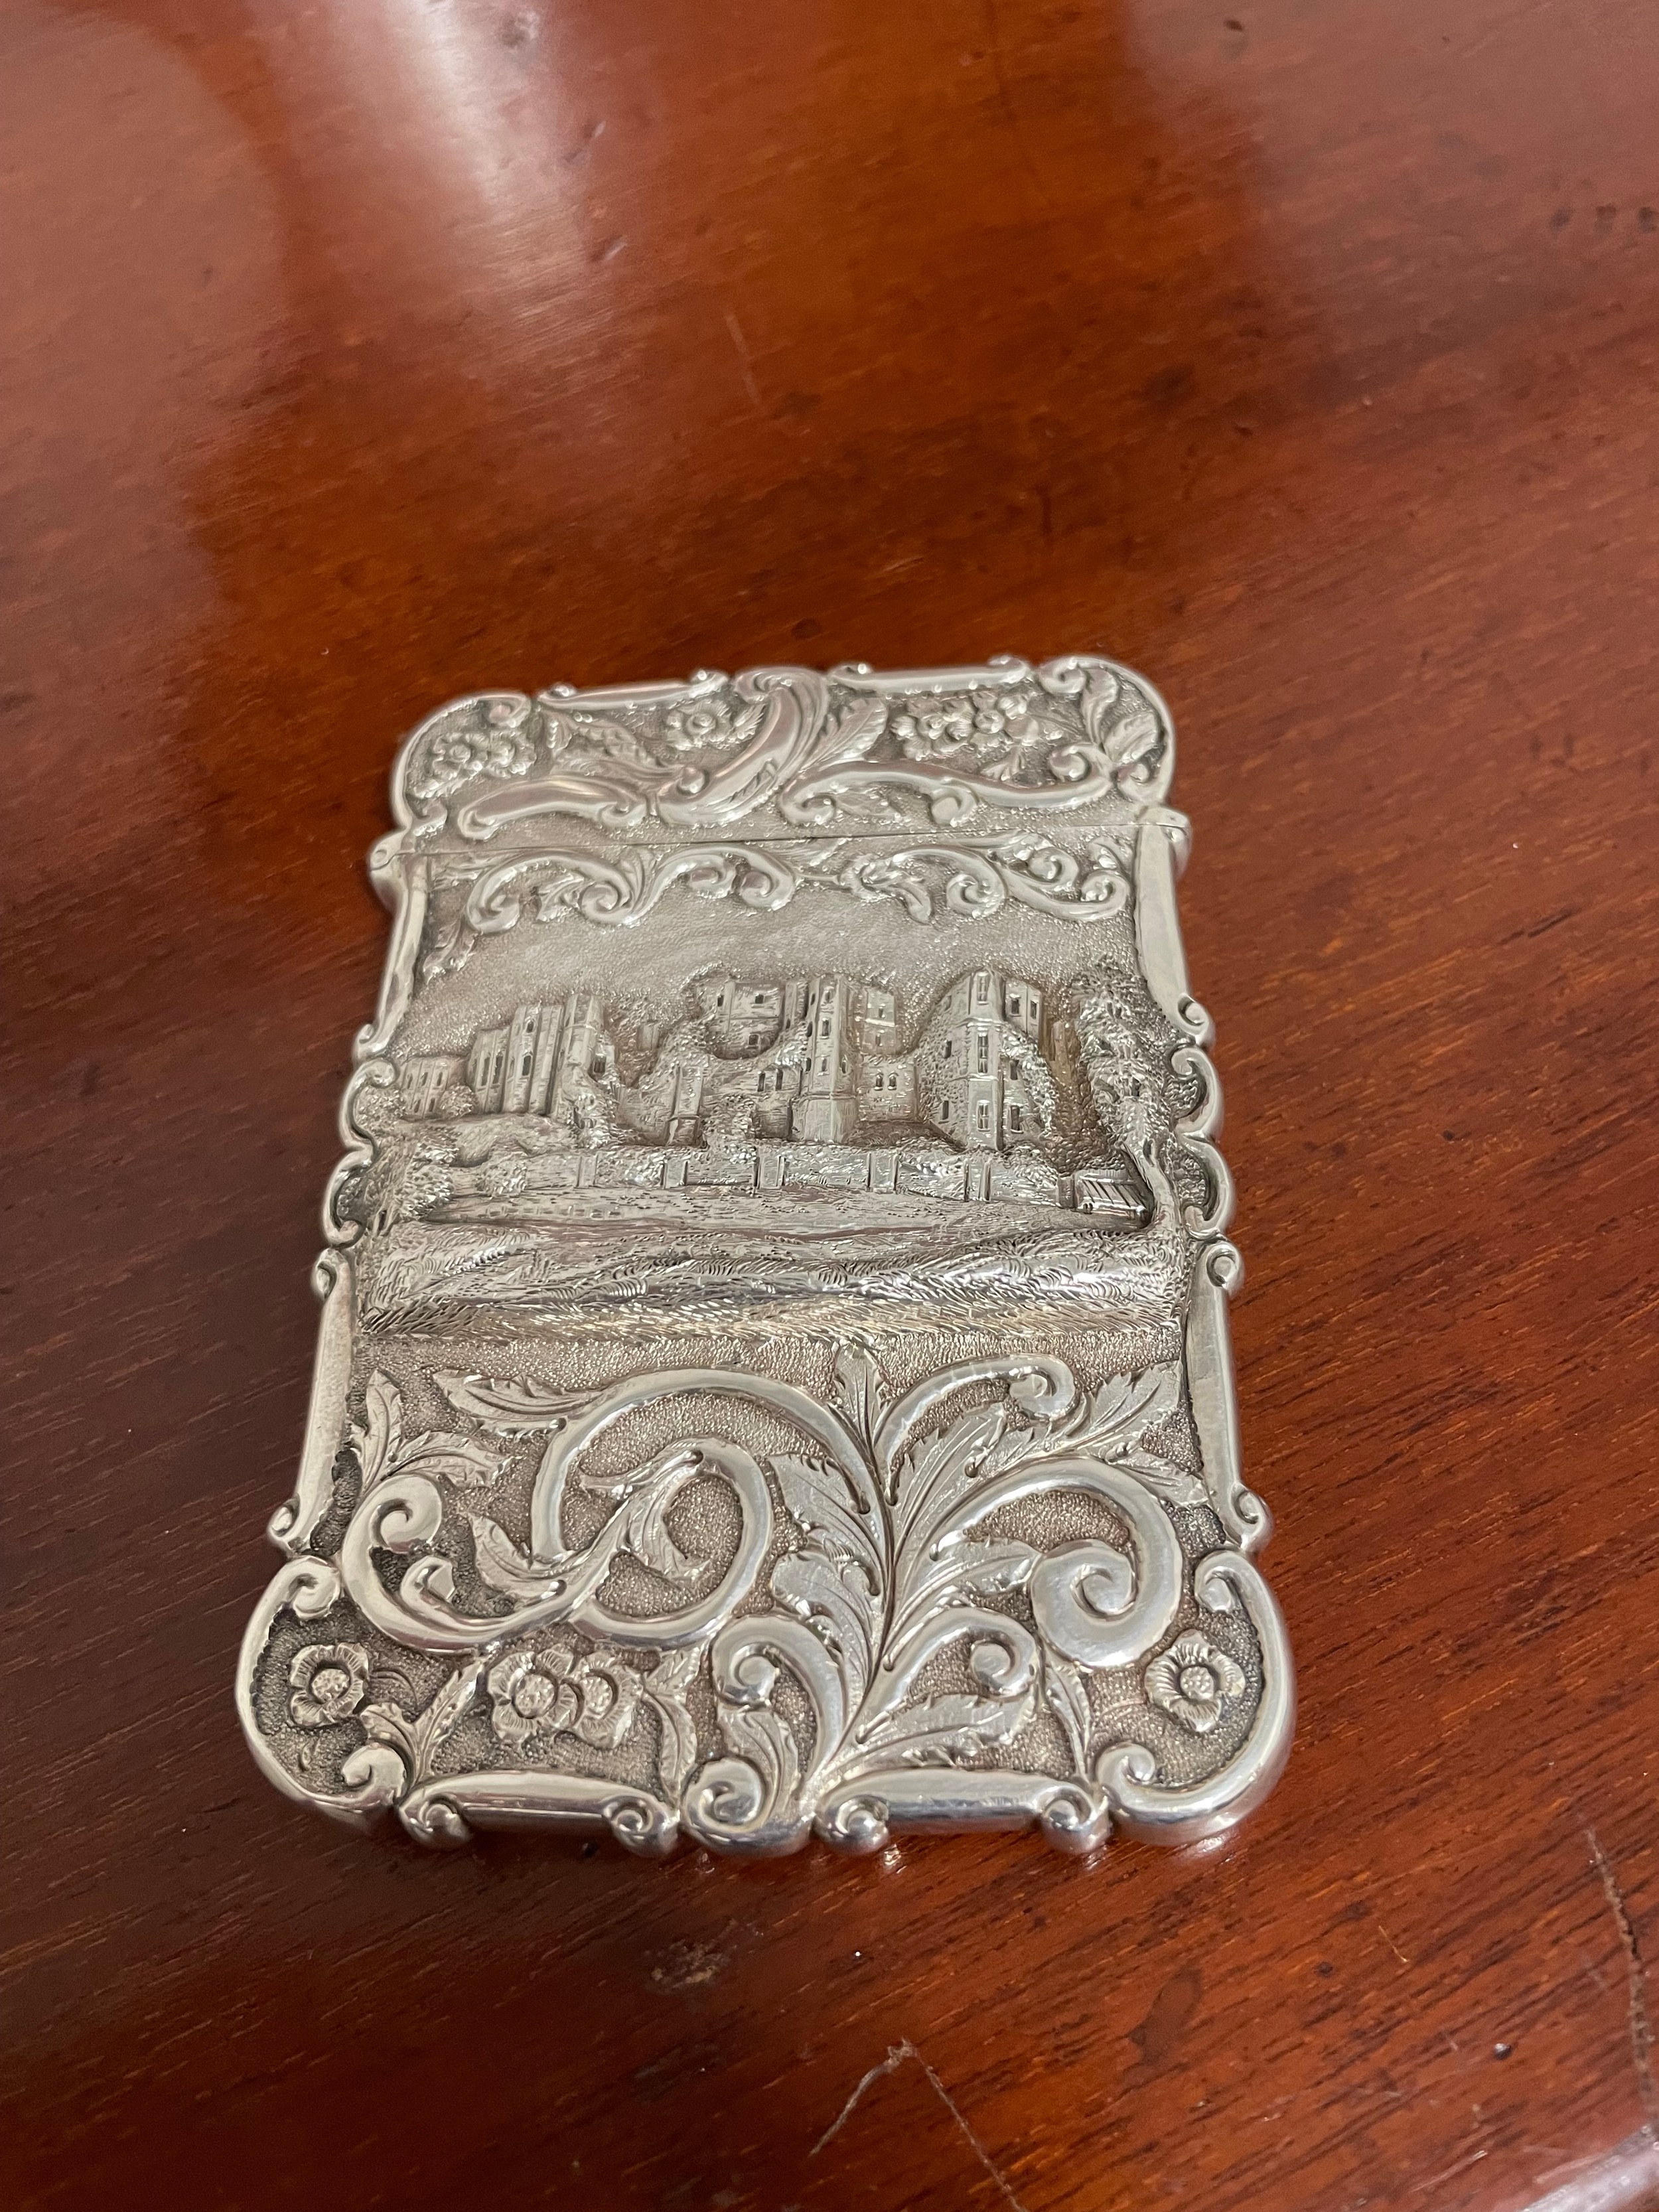 Birmingham, Late 18th/Early 19th Century, A silver embossed card case depicting Kenilworth Castle - Image 3 of 3